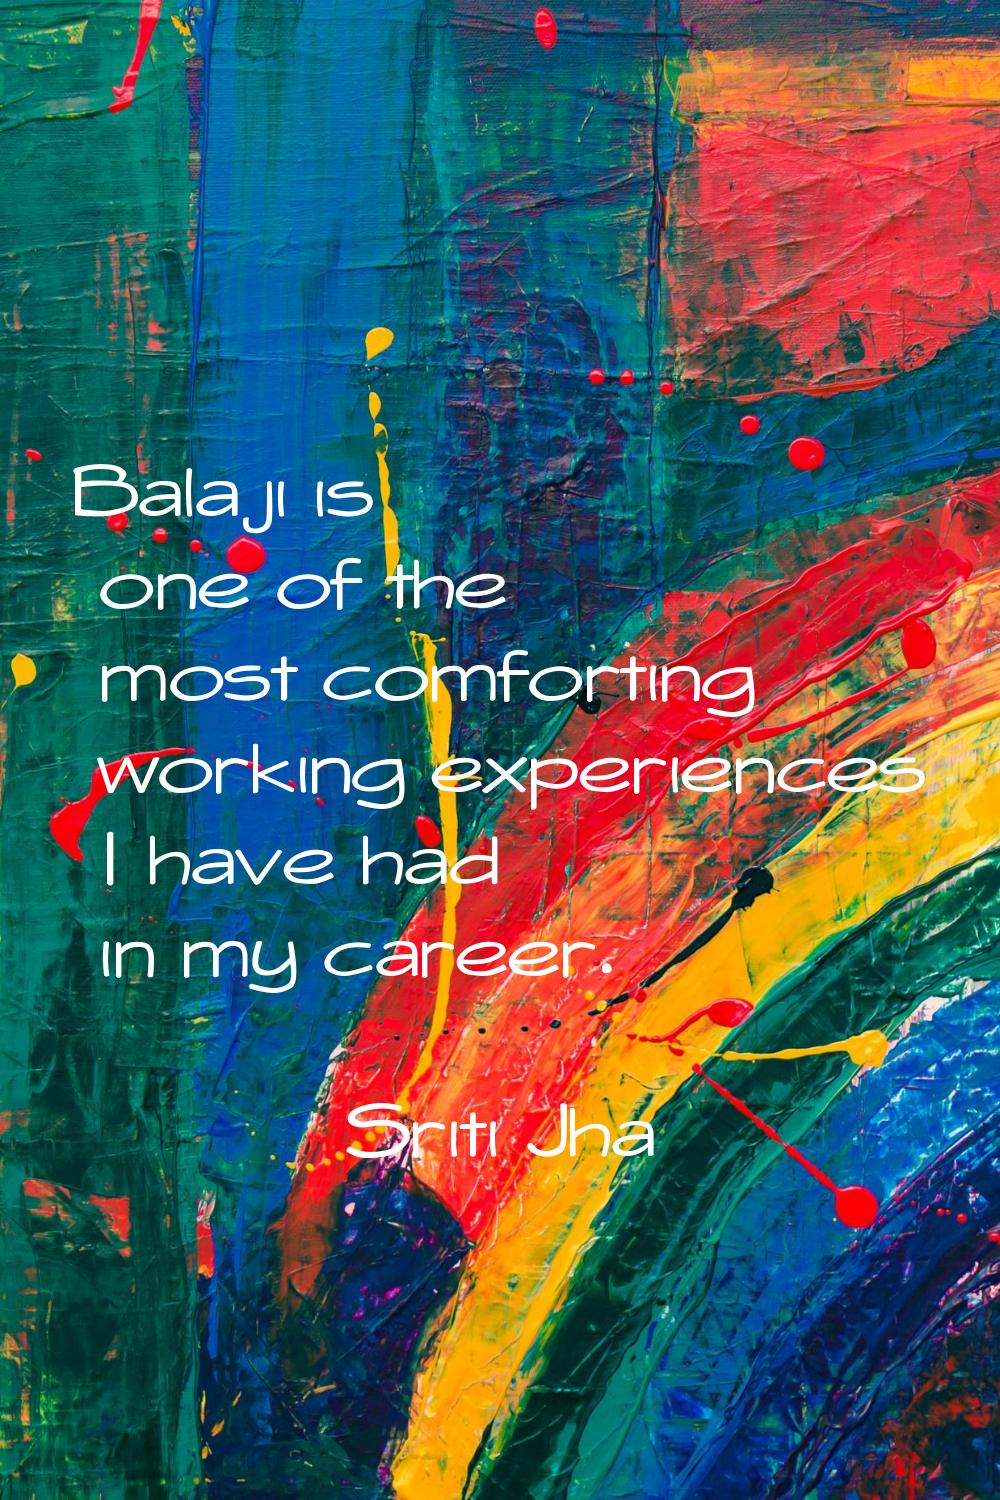 Balaji is one of the most comforting working experiences I have had in my career.